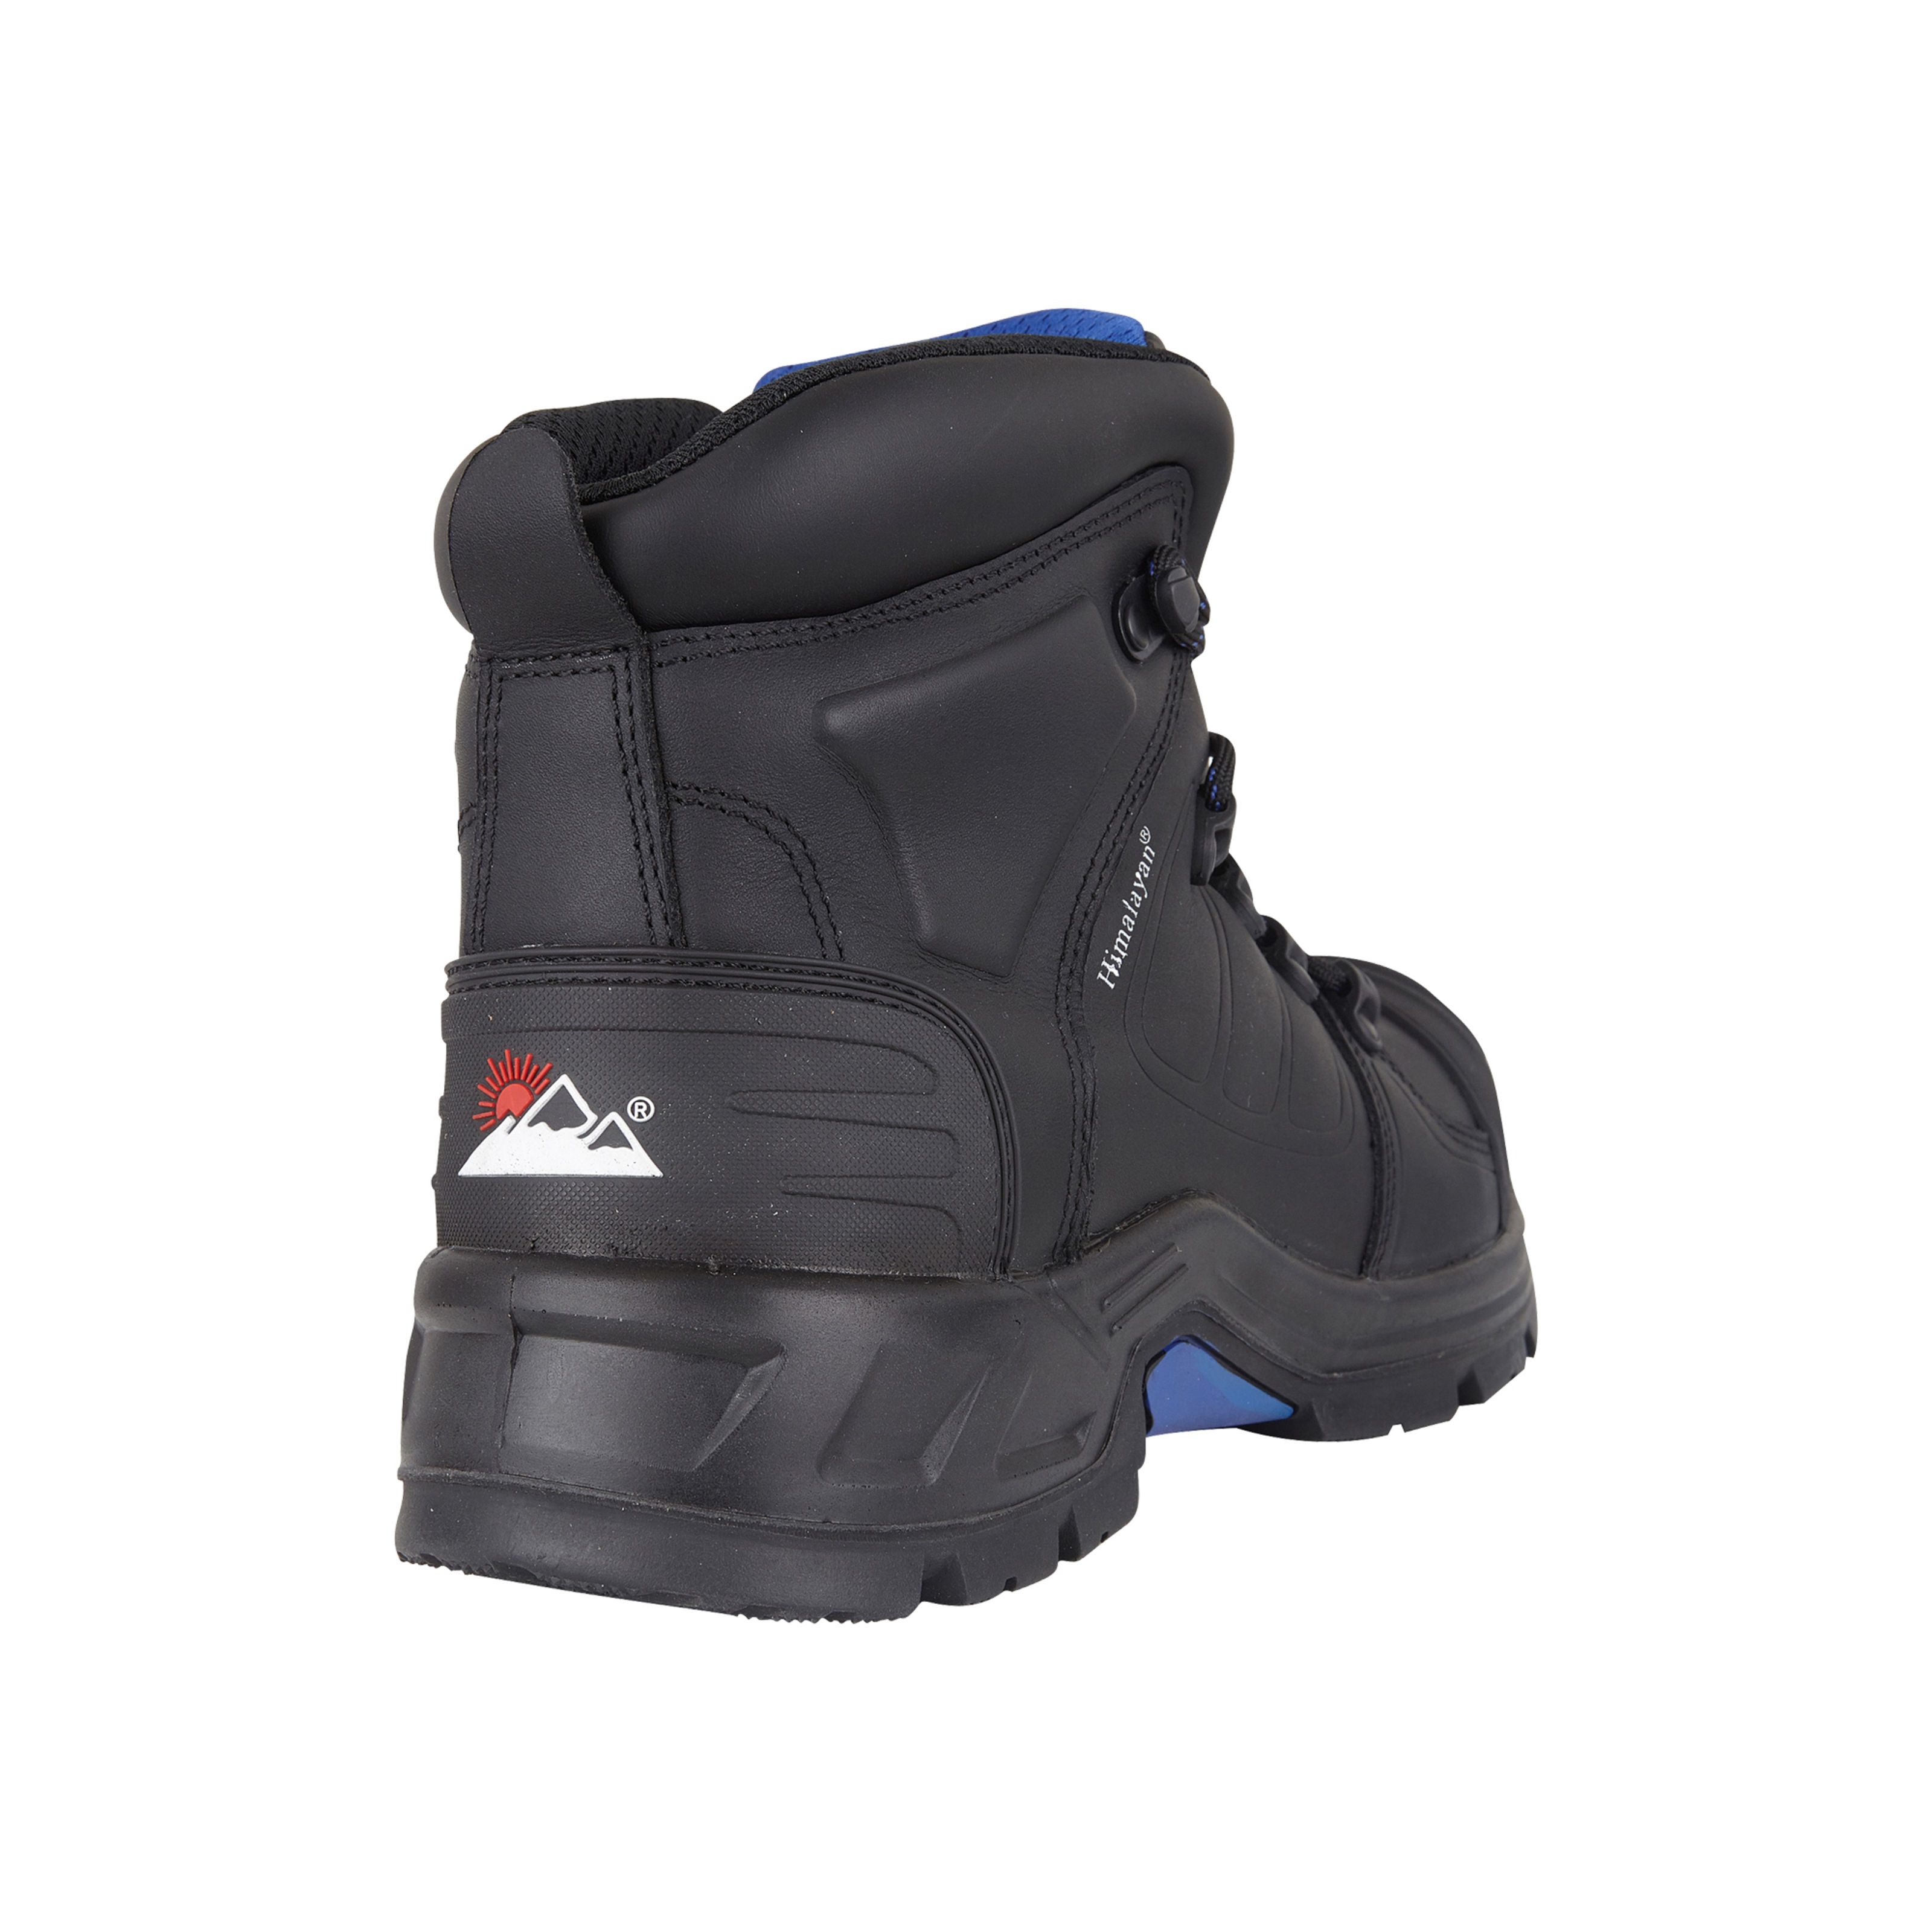 himalayan waterproof s3 safety boot